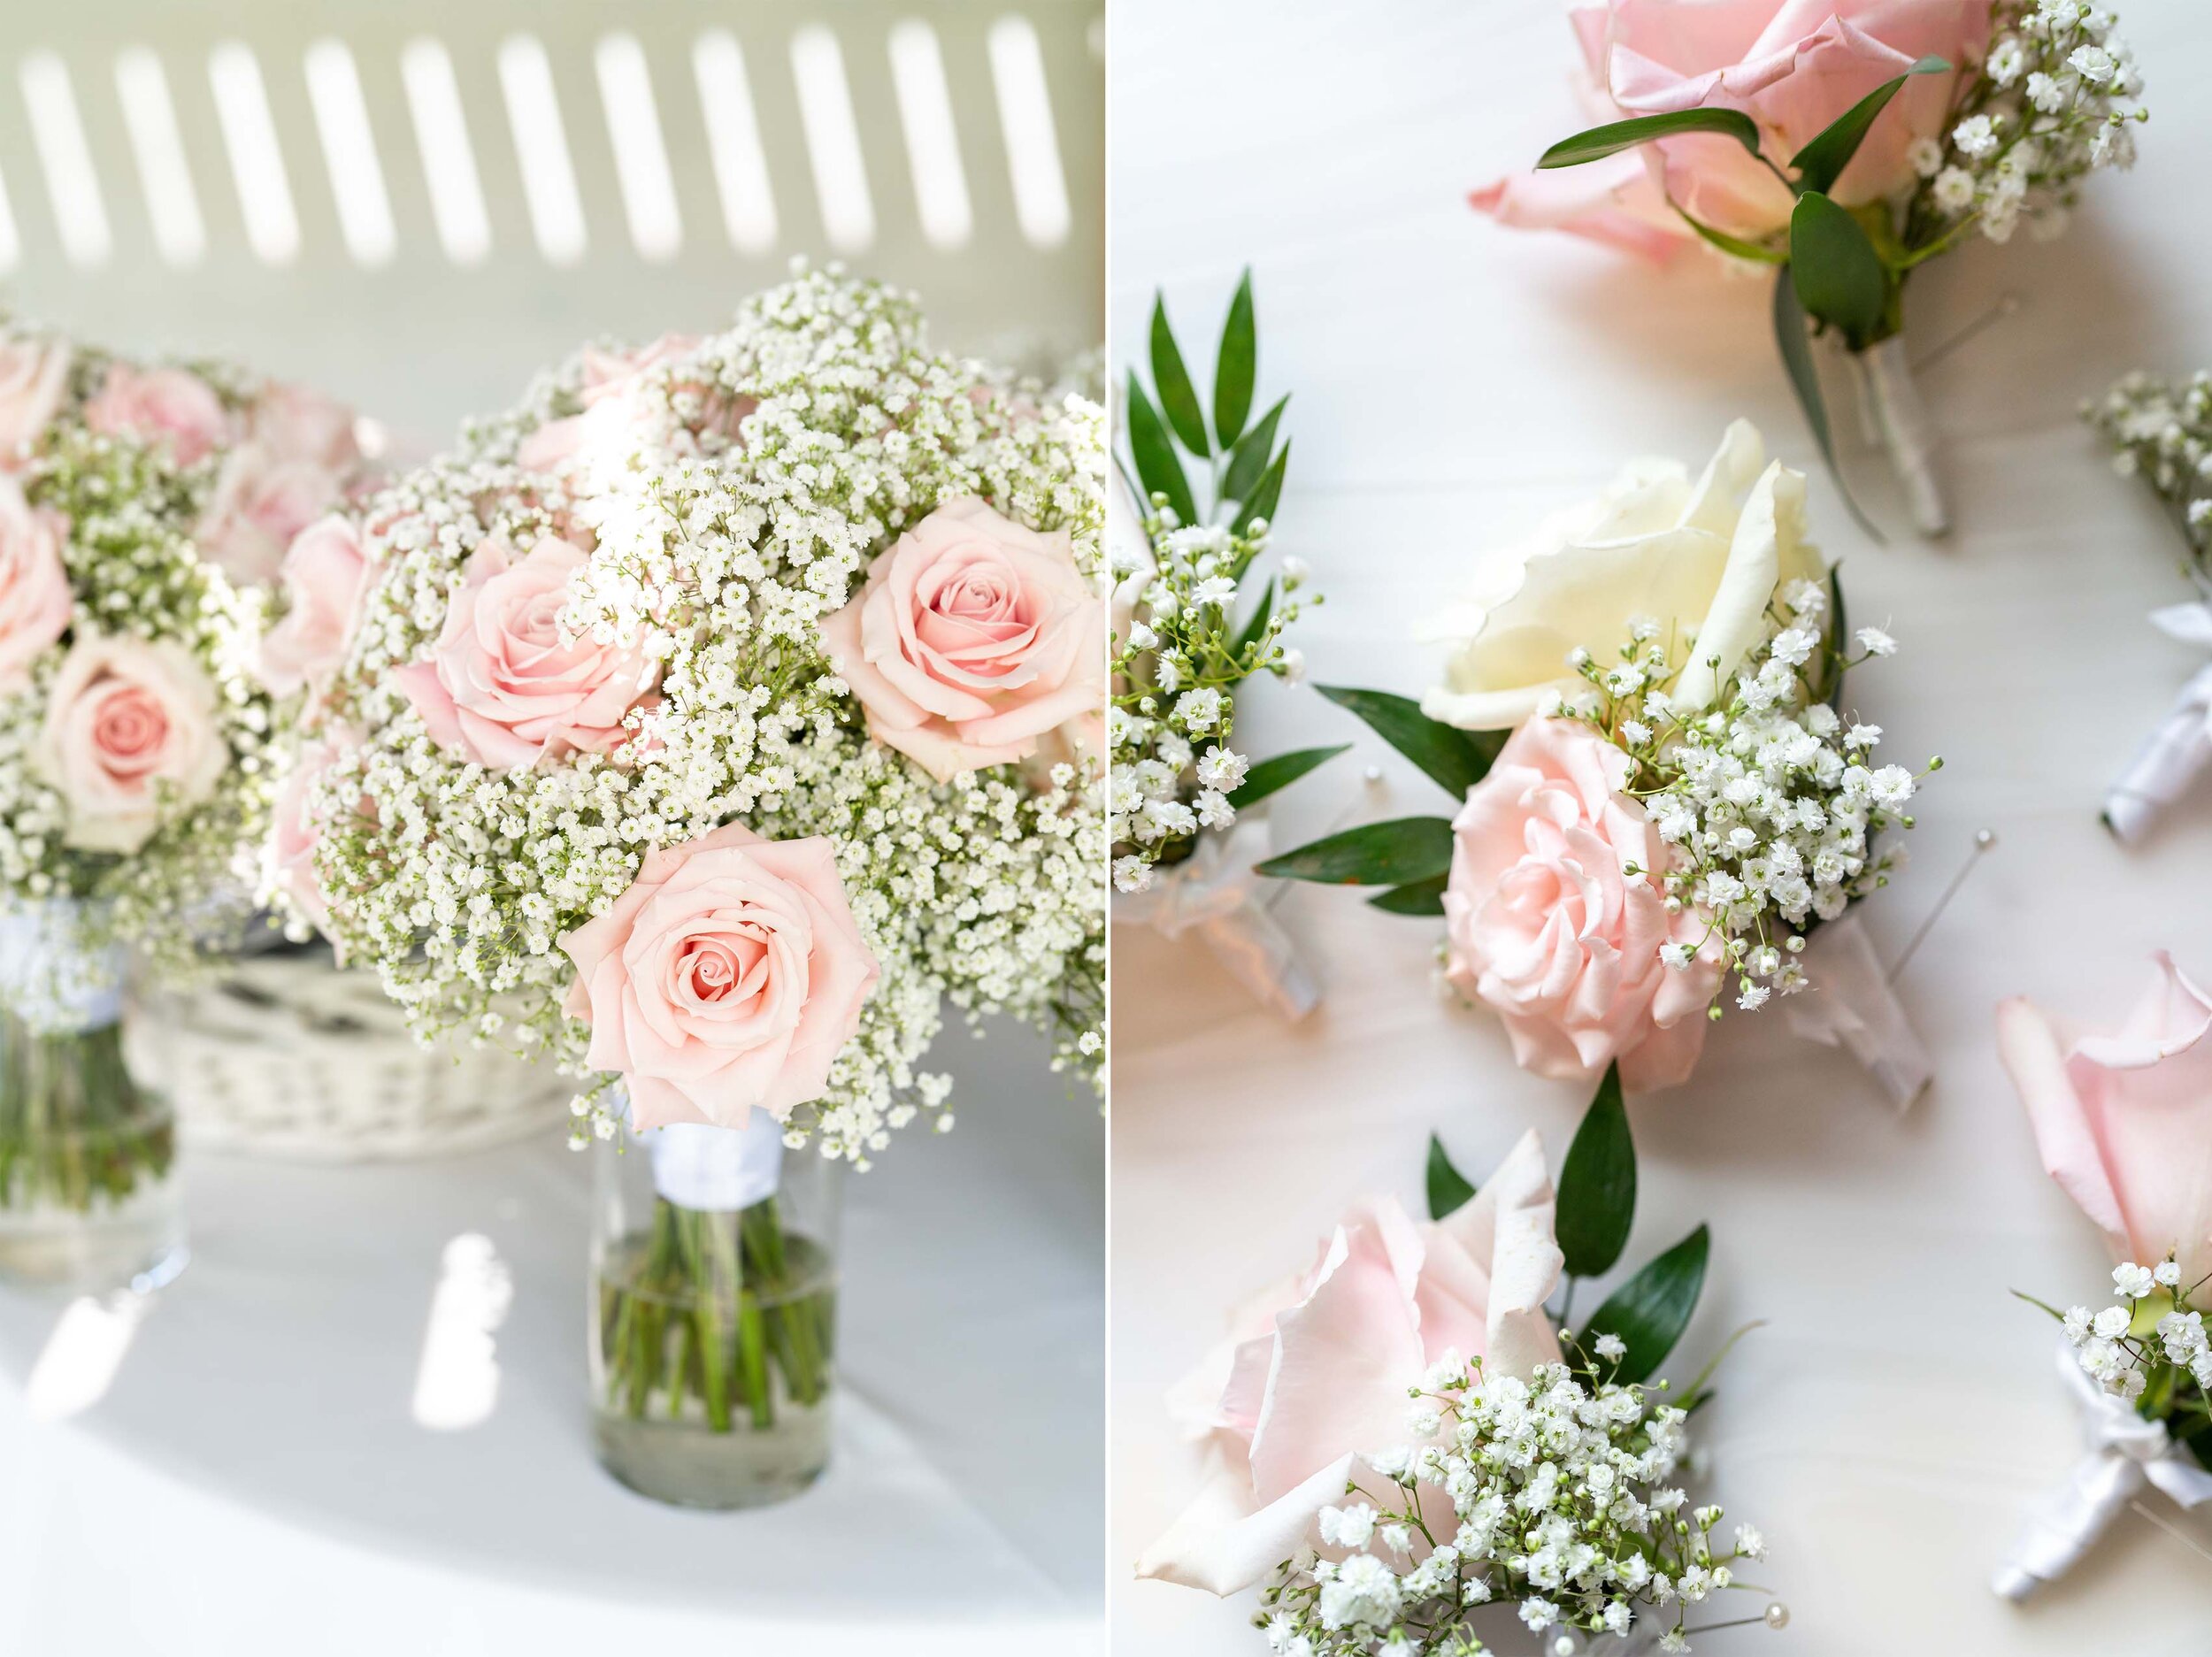 Baby's breath and pink blush roses for bridal and bridesmaid bouquets